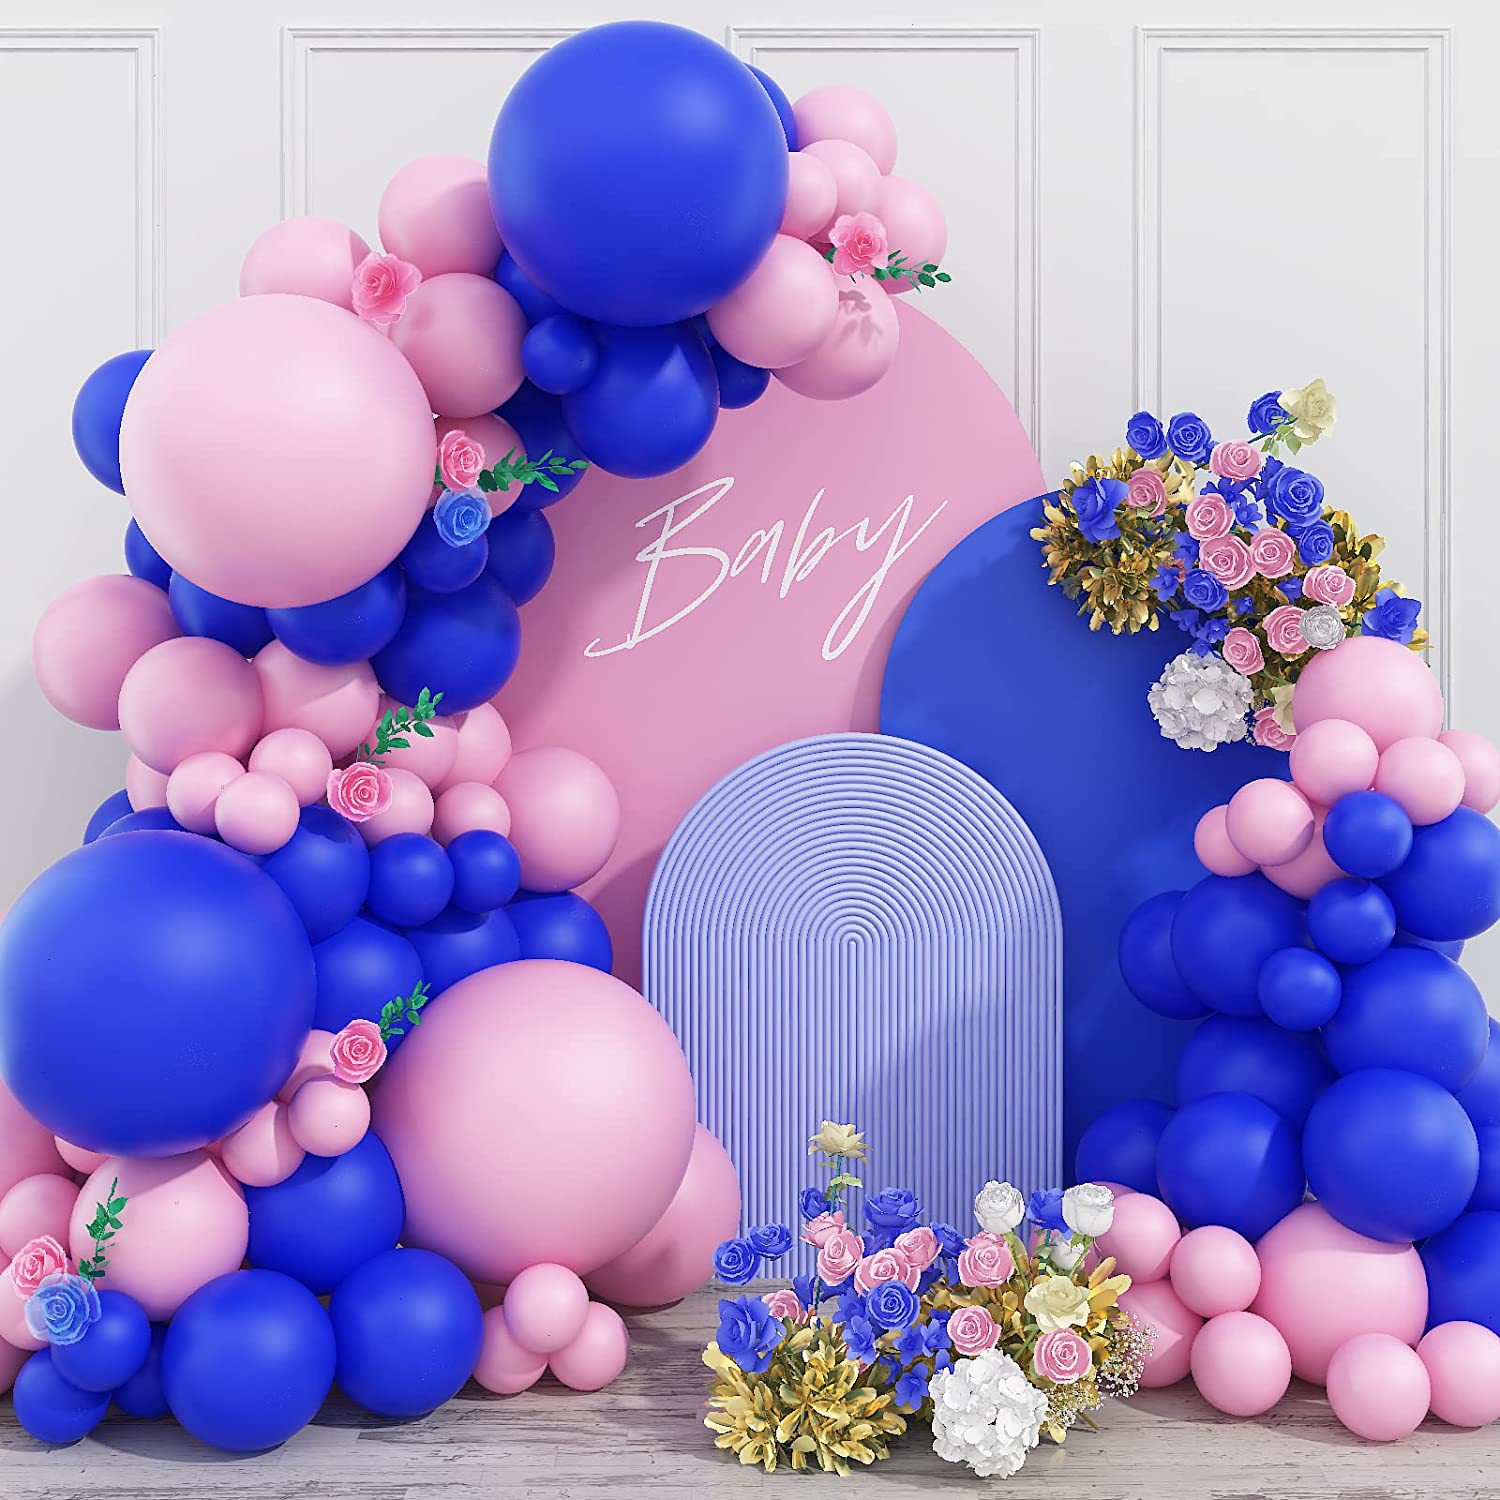 DIY Gender Reveal Party Decorations-138pcs Pink and Blue Balloon Garland  Kits for Gender Reveal Balloons Backdrop Wall Birthday Party Supplies  Bridal